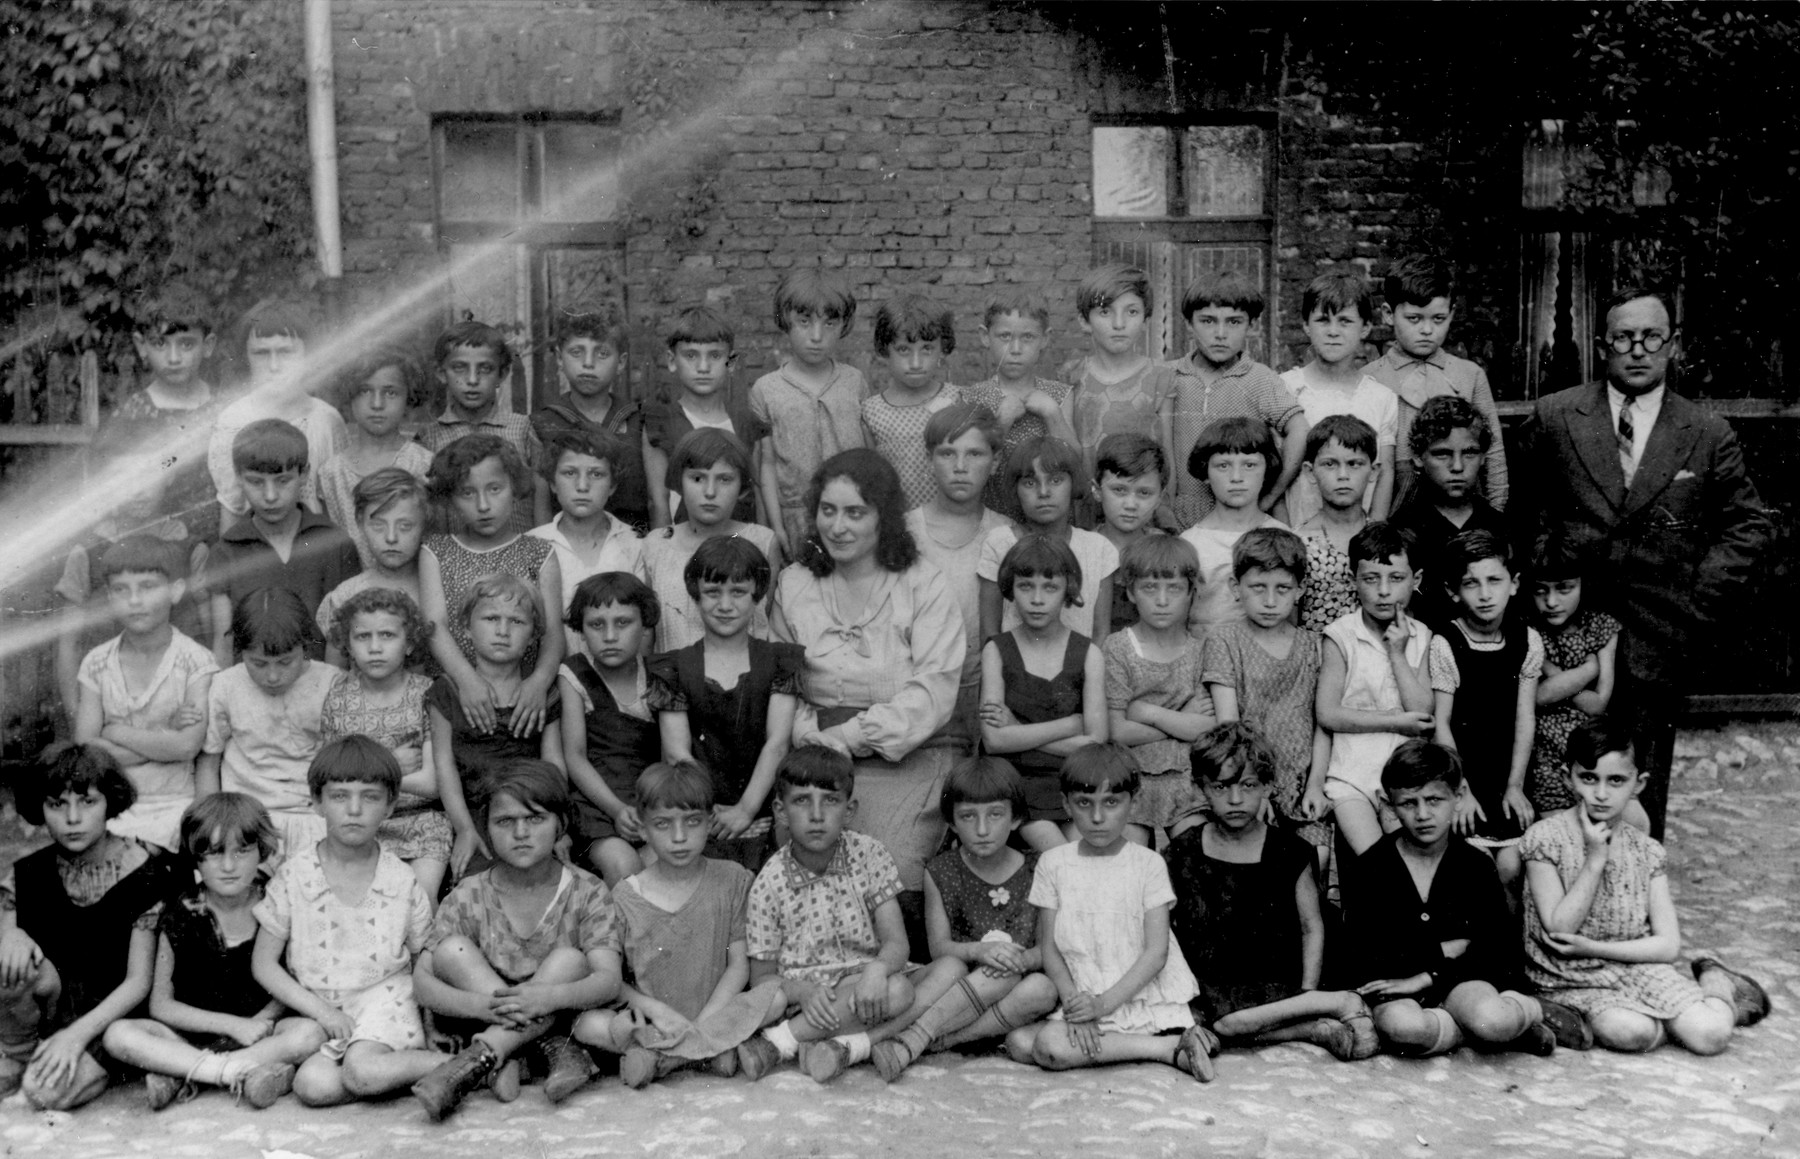 Group portrait of students and their teachers at a Jewish elementary school in Bedzin.